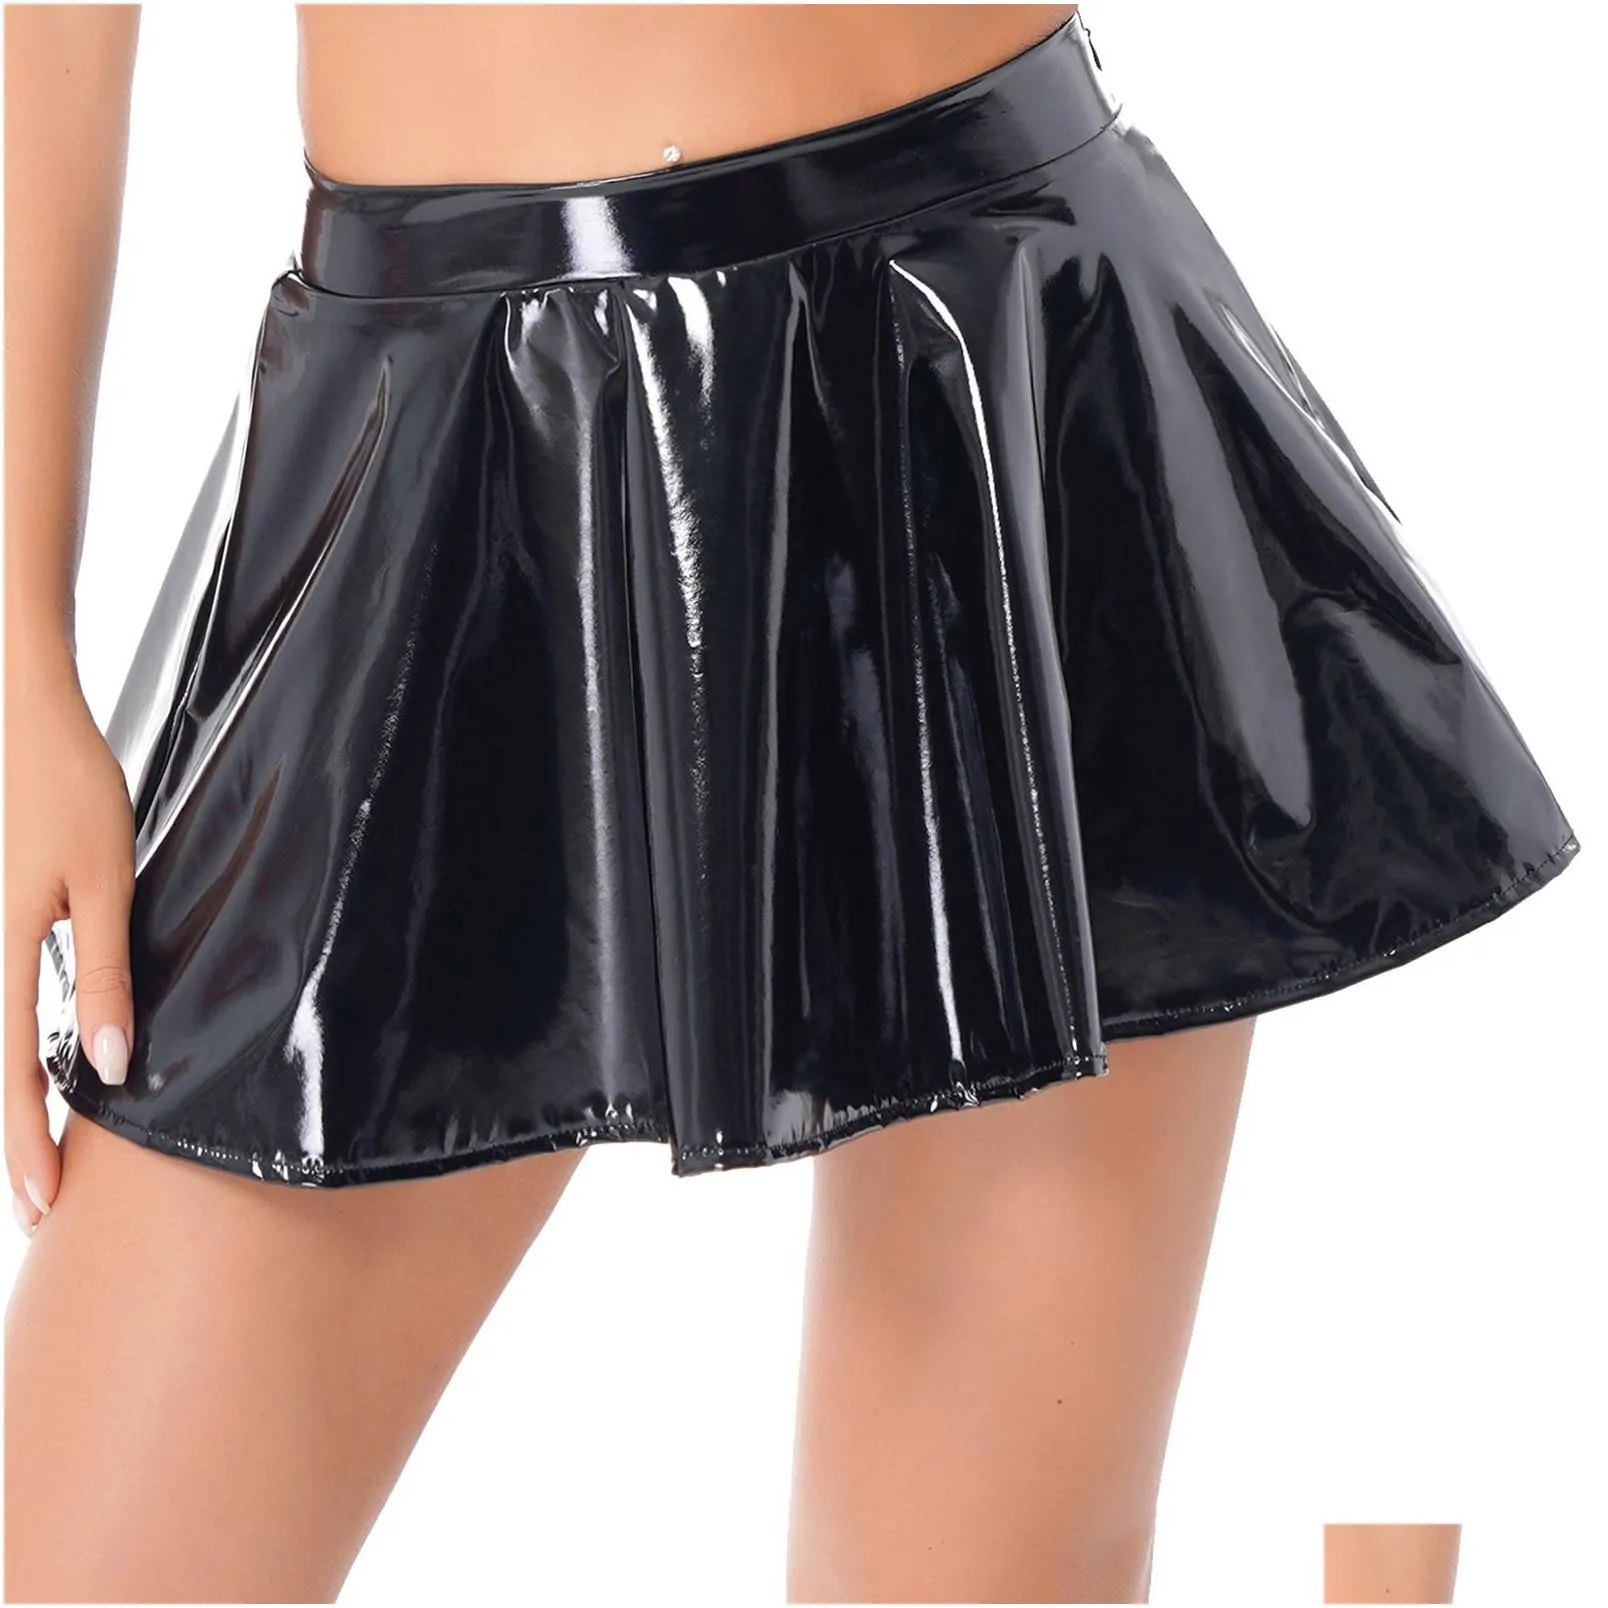 Skirts Womens Latex Skirt For Rave Party Club Dance Stage Performance Costume Clubwear Woman Wetlook Patent Leather Flared Mini Drop Dh78S